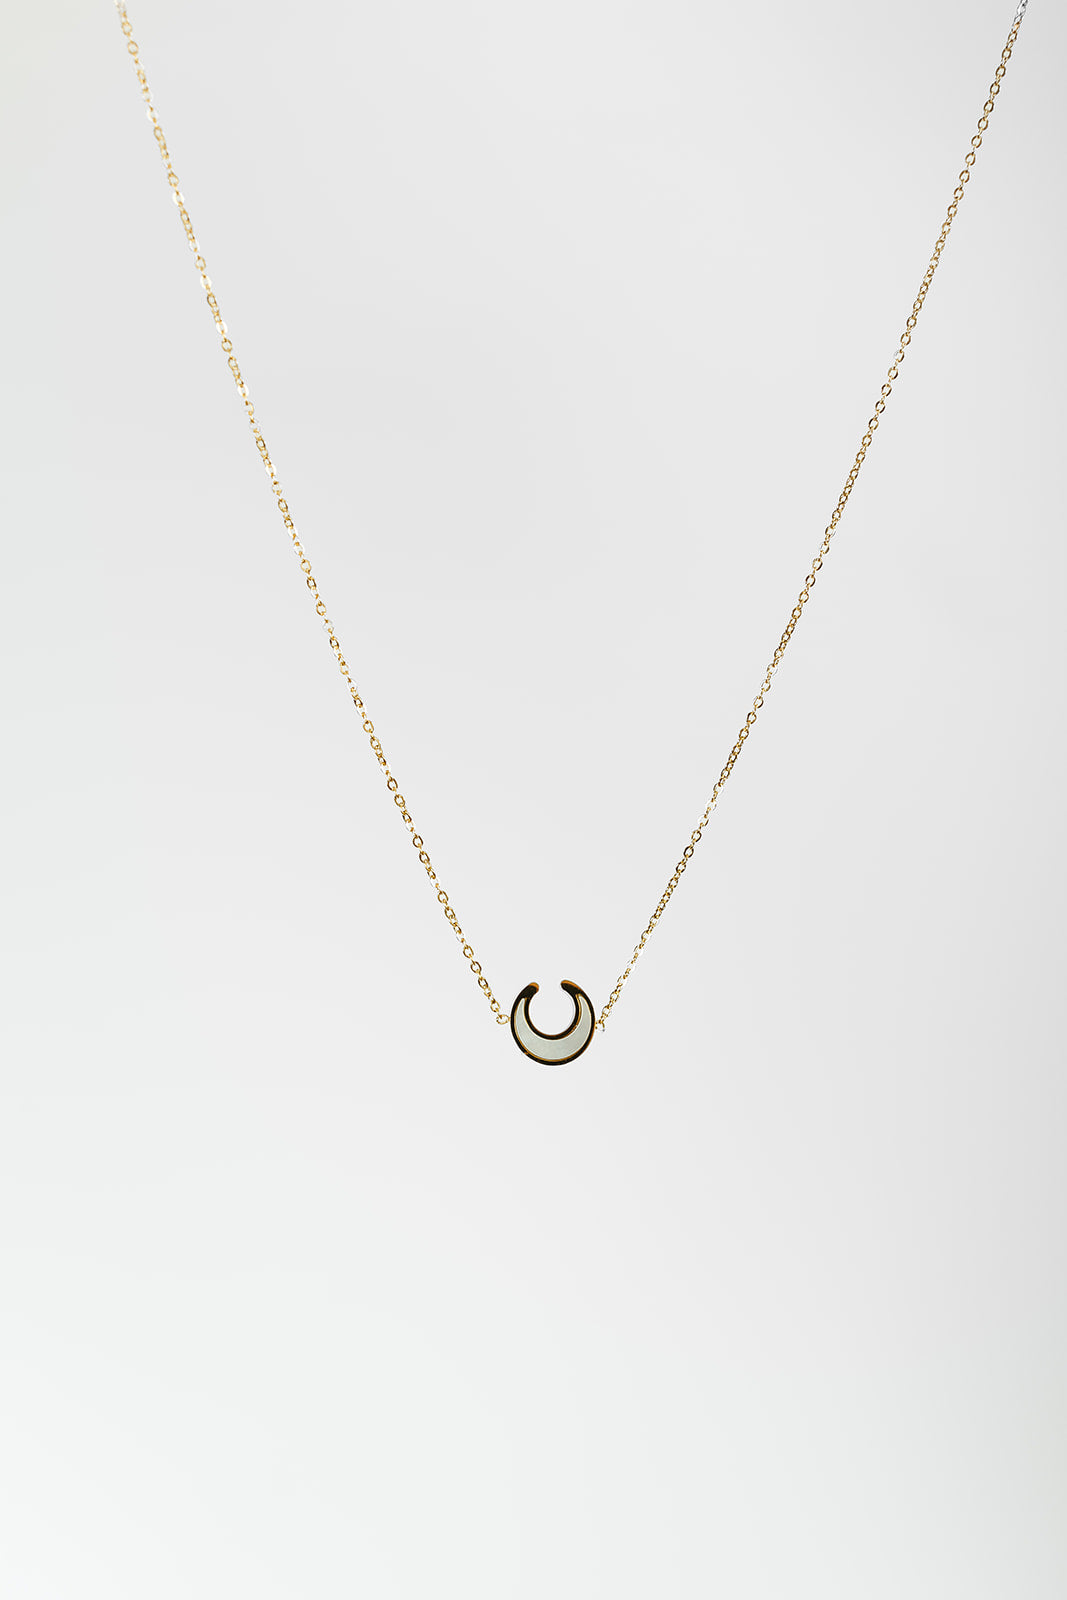 Dainty Abalone Shell Crescent Necklace